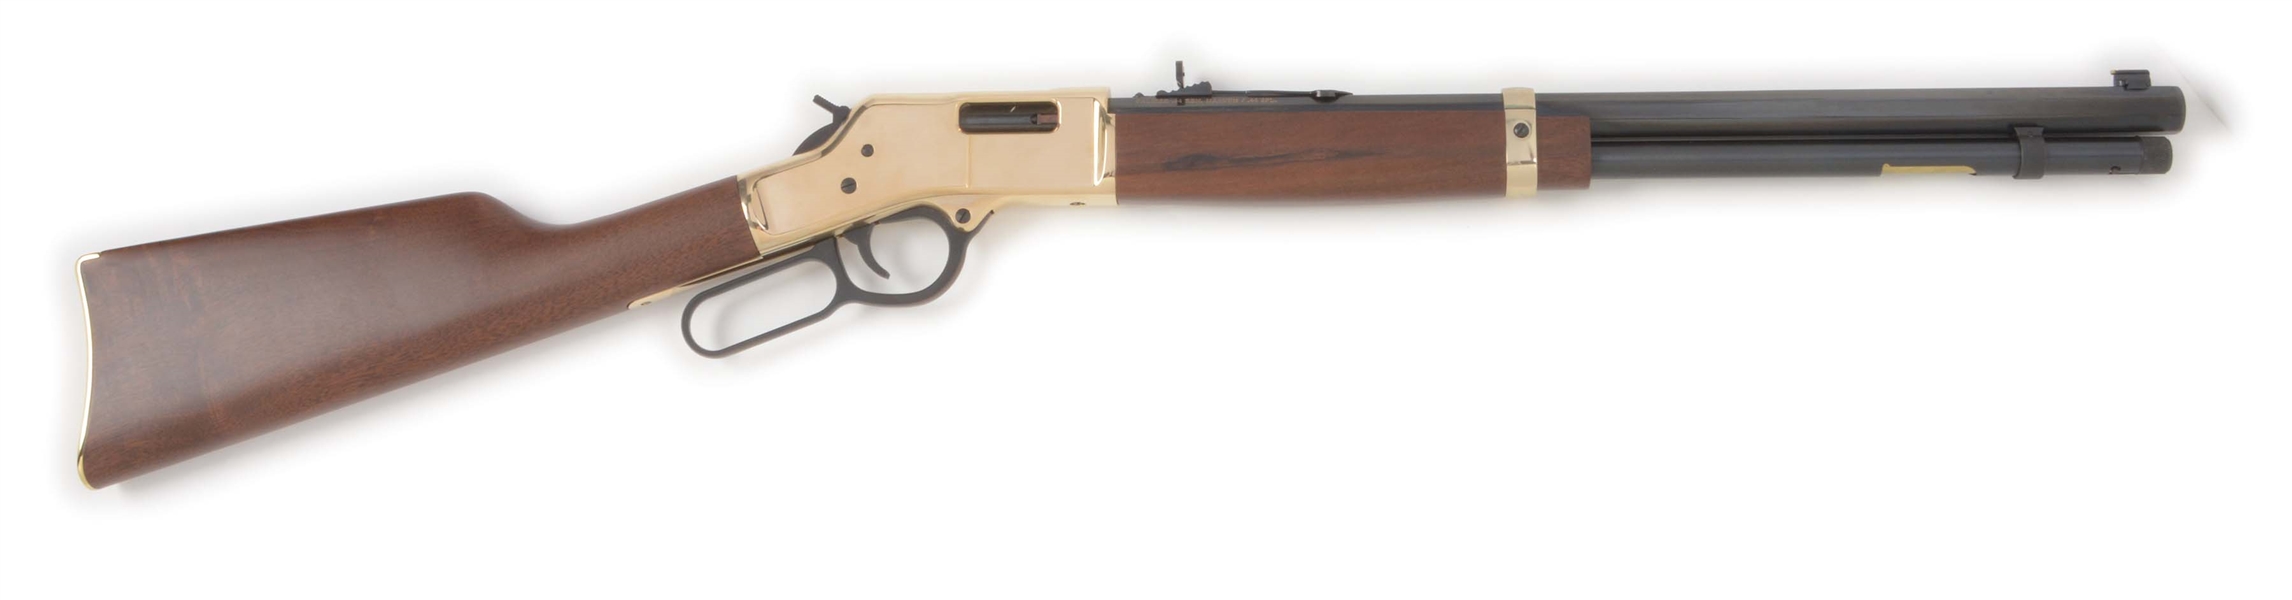 (M) HENRY REPEATING ARMS BIG BOY .44 LEVER ACTION RIFLE.